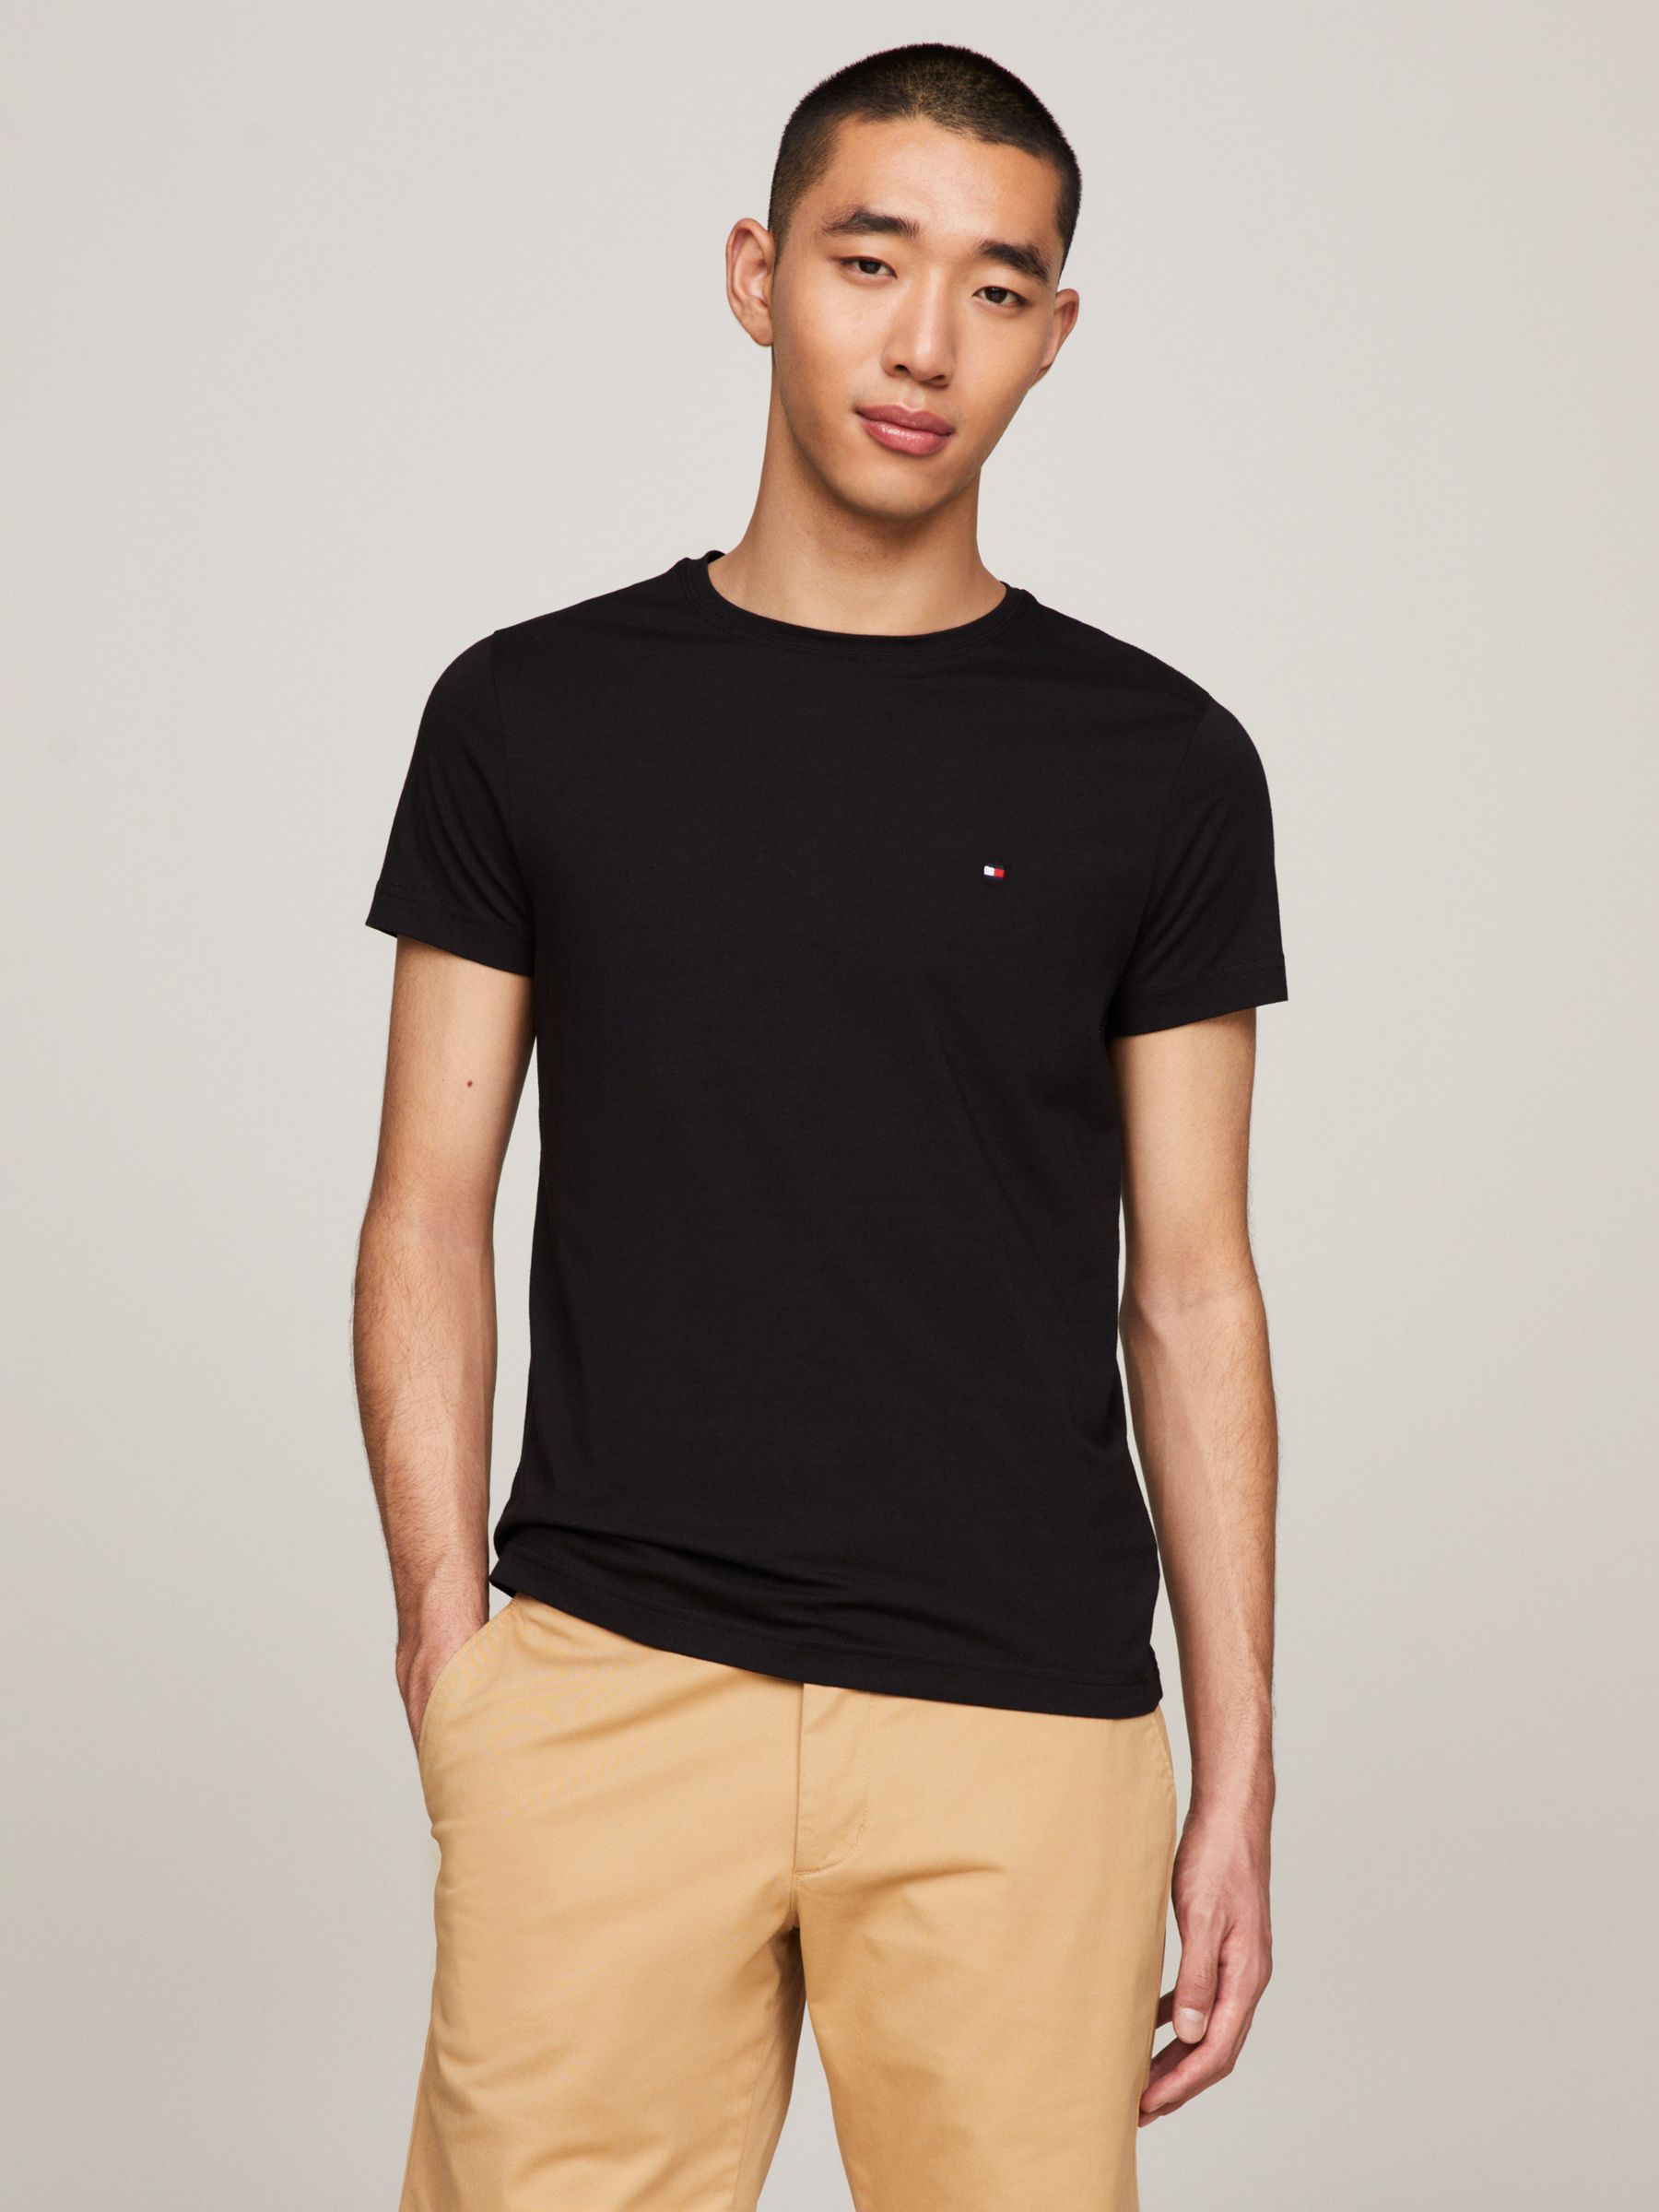 Tommy Hilfiger Core Stretch Fit Crew Neck T-Shirt, at John Lewis